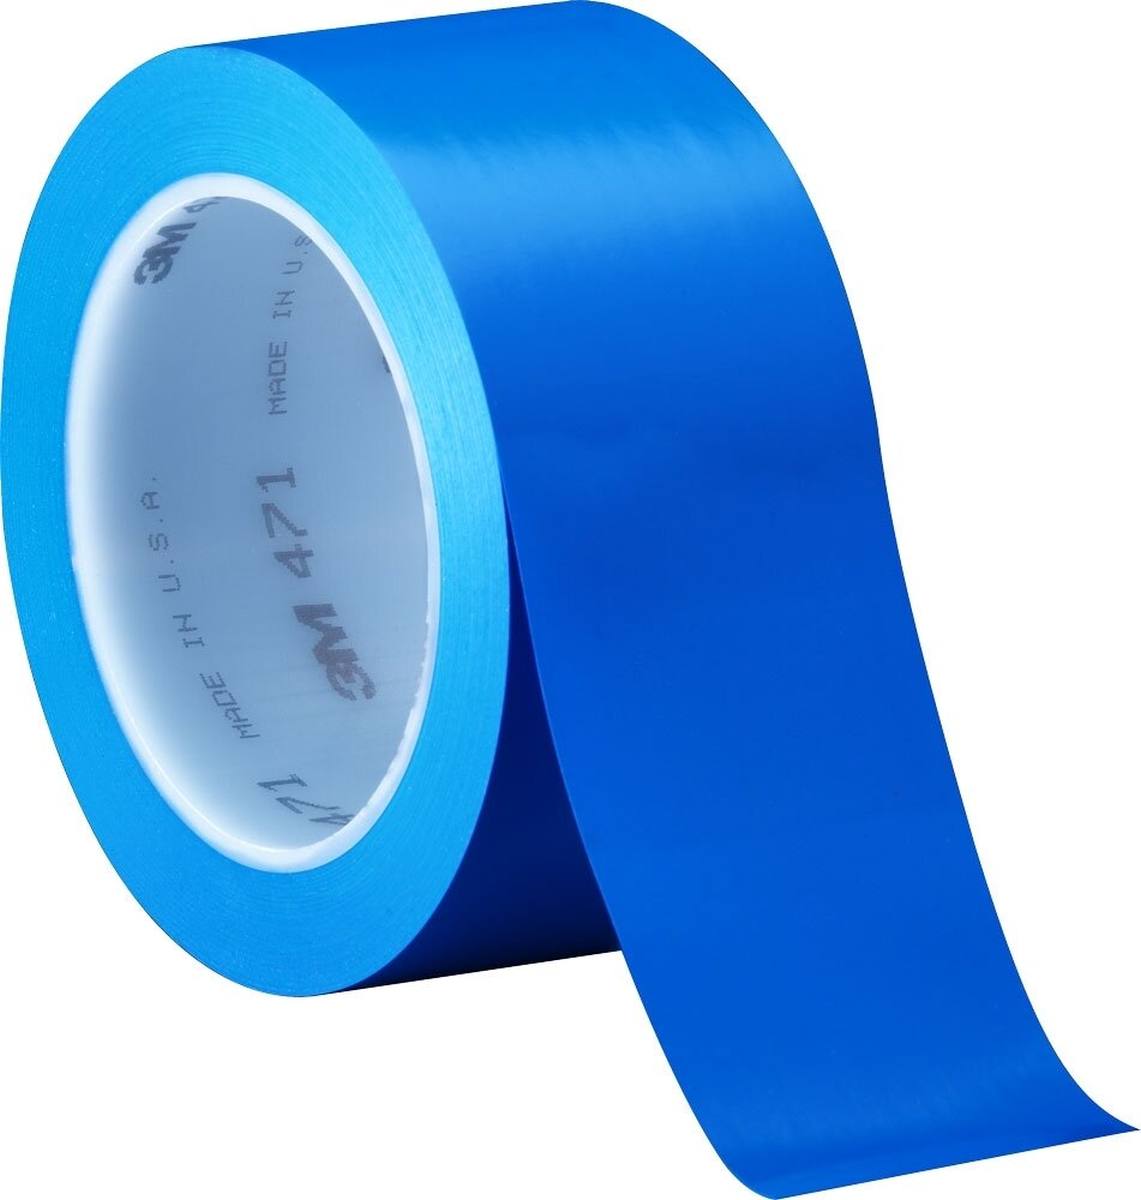 3M soft PVC adhesive tape 471 F, blue, 50 mm x 33 m, 0.13 mm, individually and practically packed